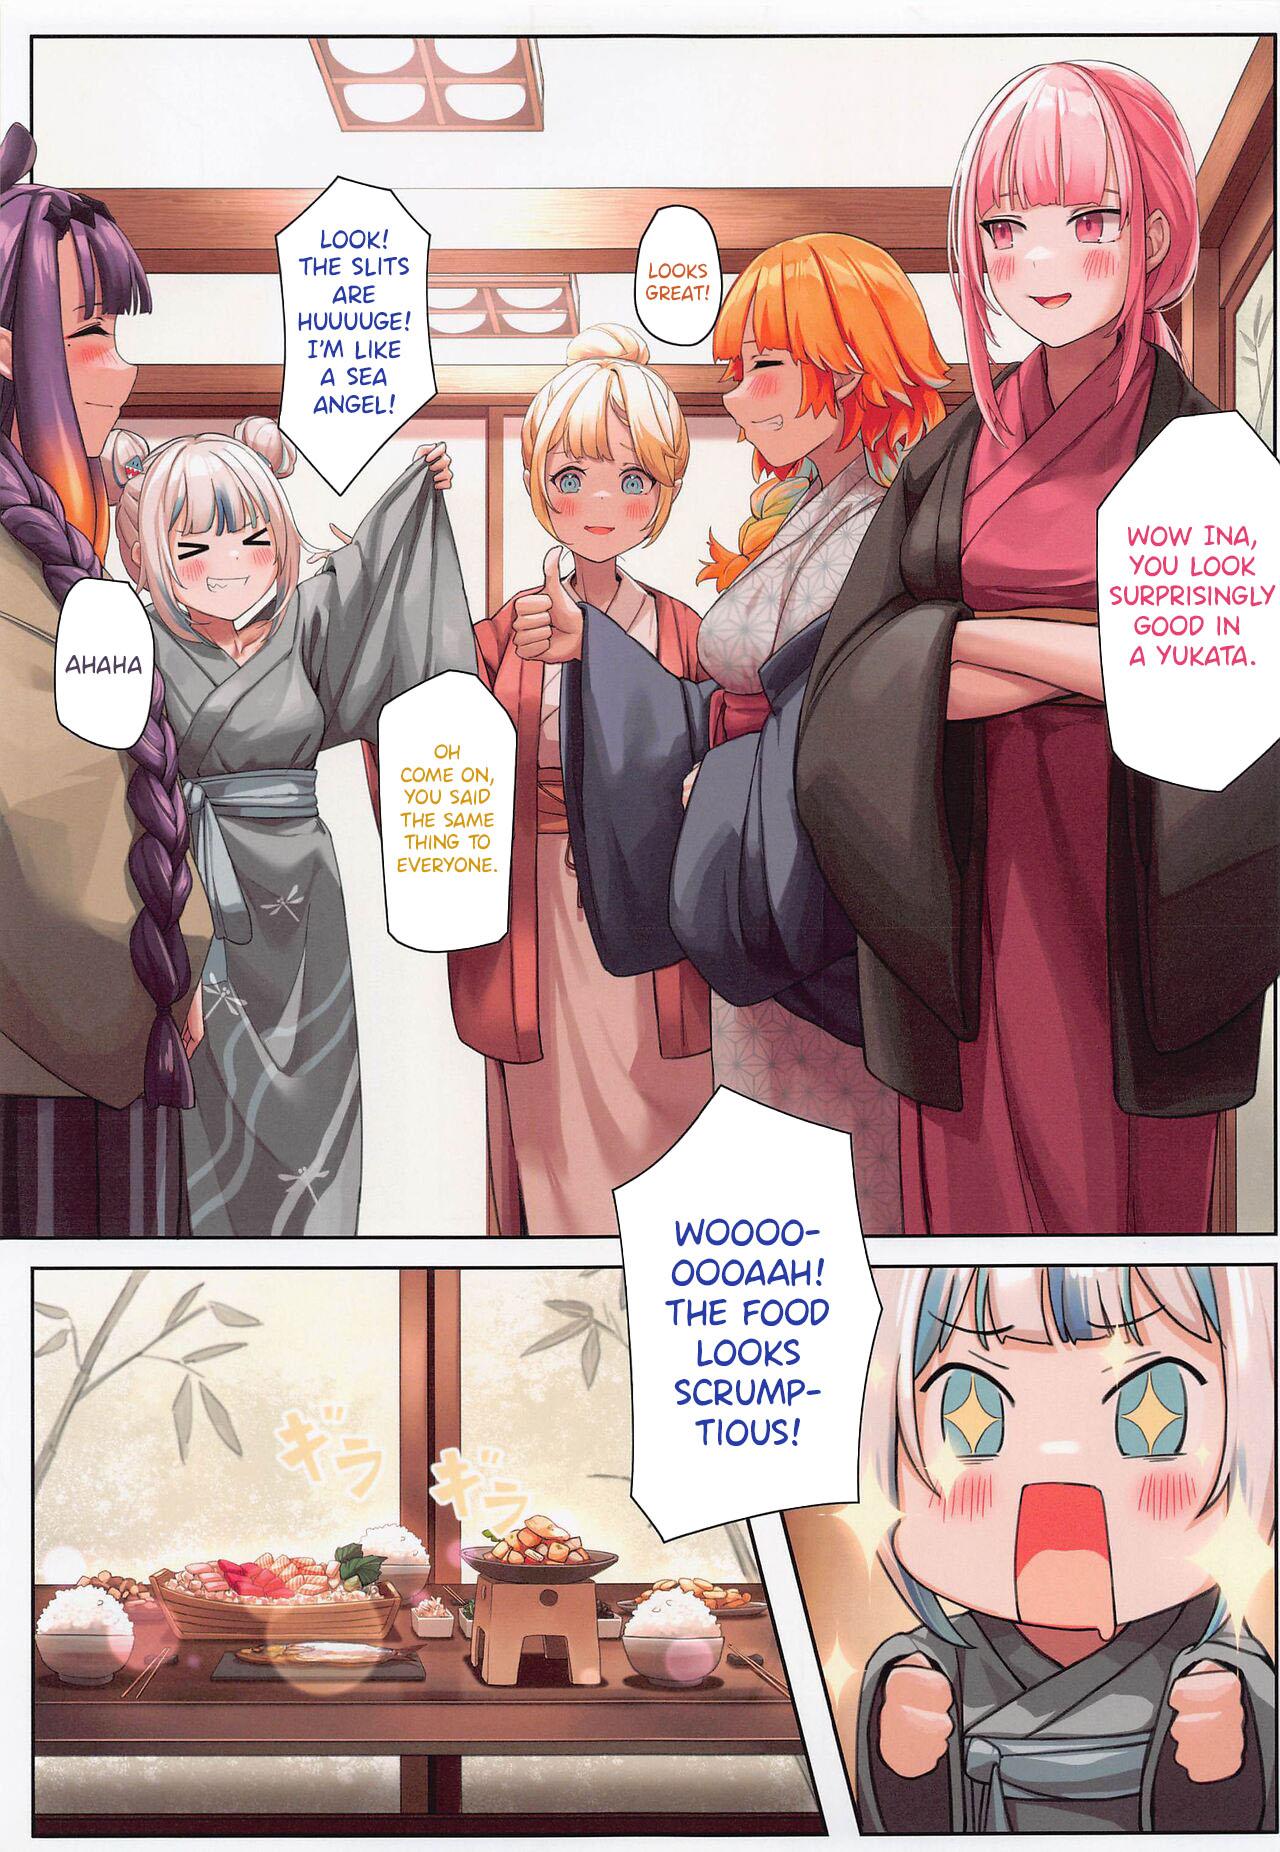 Stockings AmeSame Onsen Ryokou no Iroiro | The Many Happenings of AmeSame's Hot Spring Trip - Hololive Free Blowjobs - Page 6